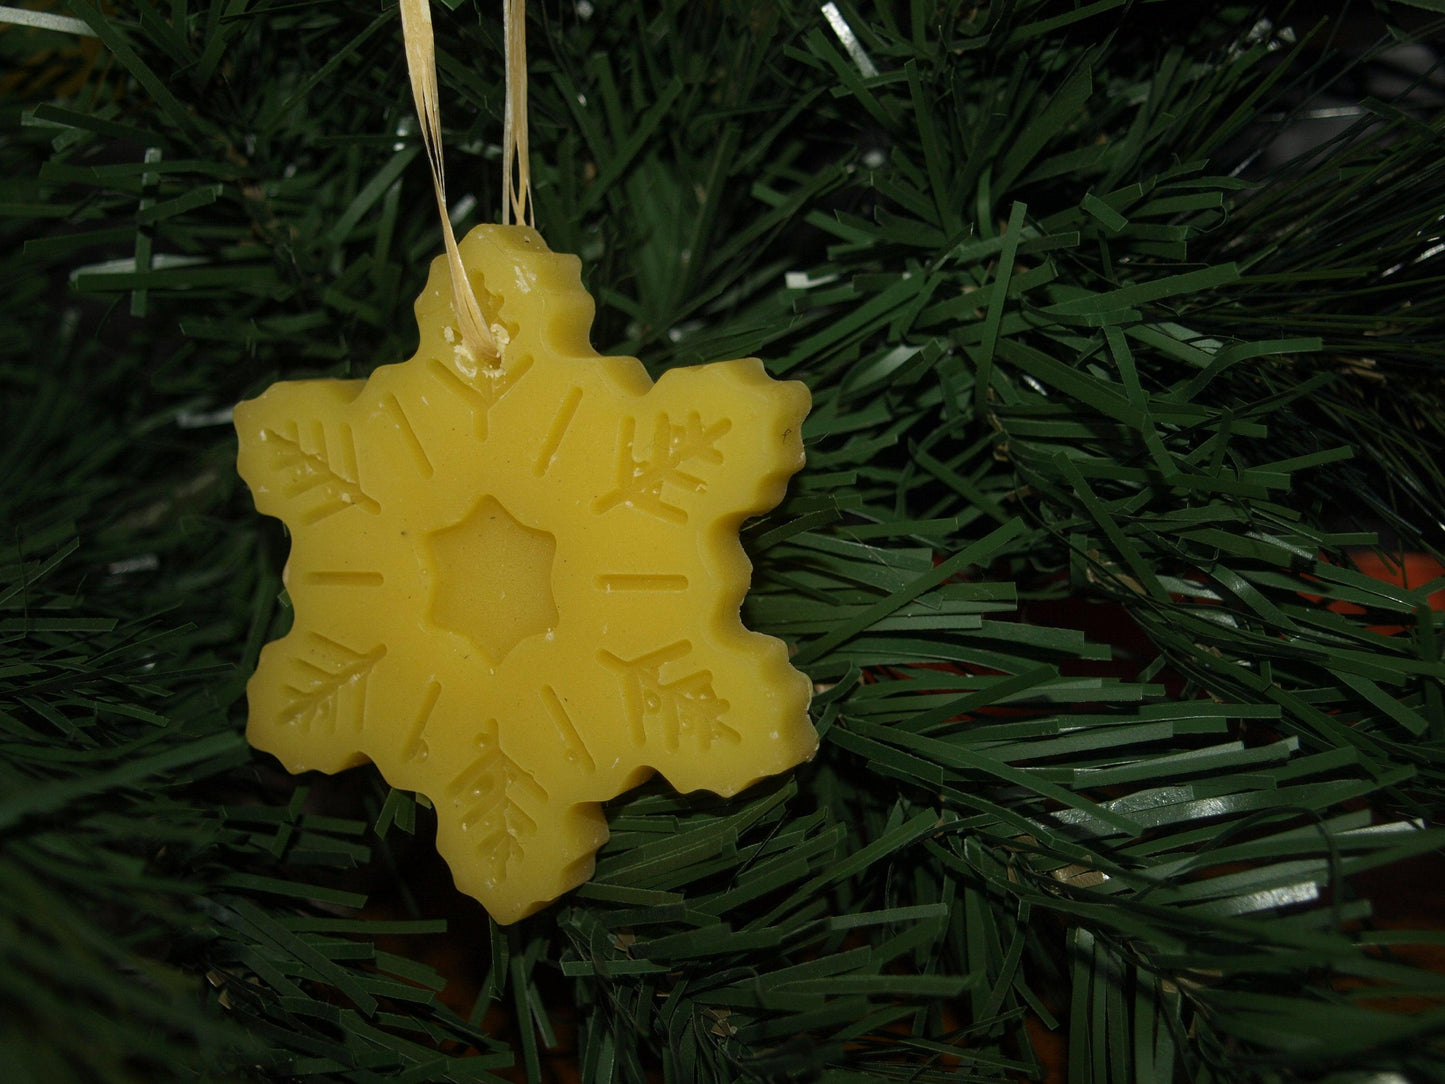 Beeswax Melts Snowflakes Christmas Tree Decorations Ornament 100% Natural Product Living Scent Eco Friendly UK - 2 little bees